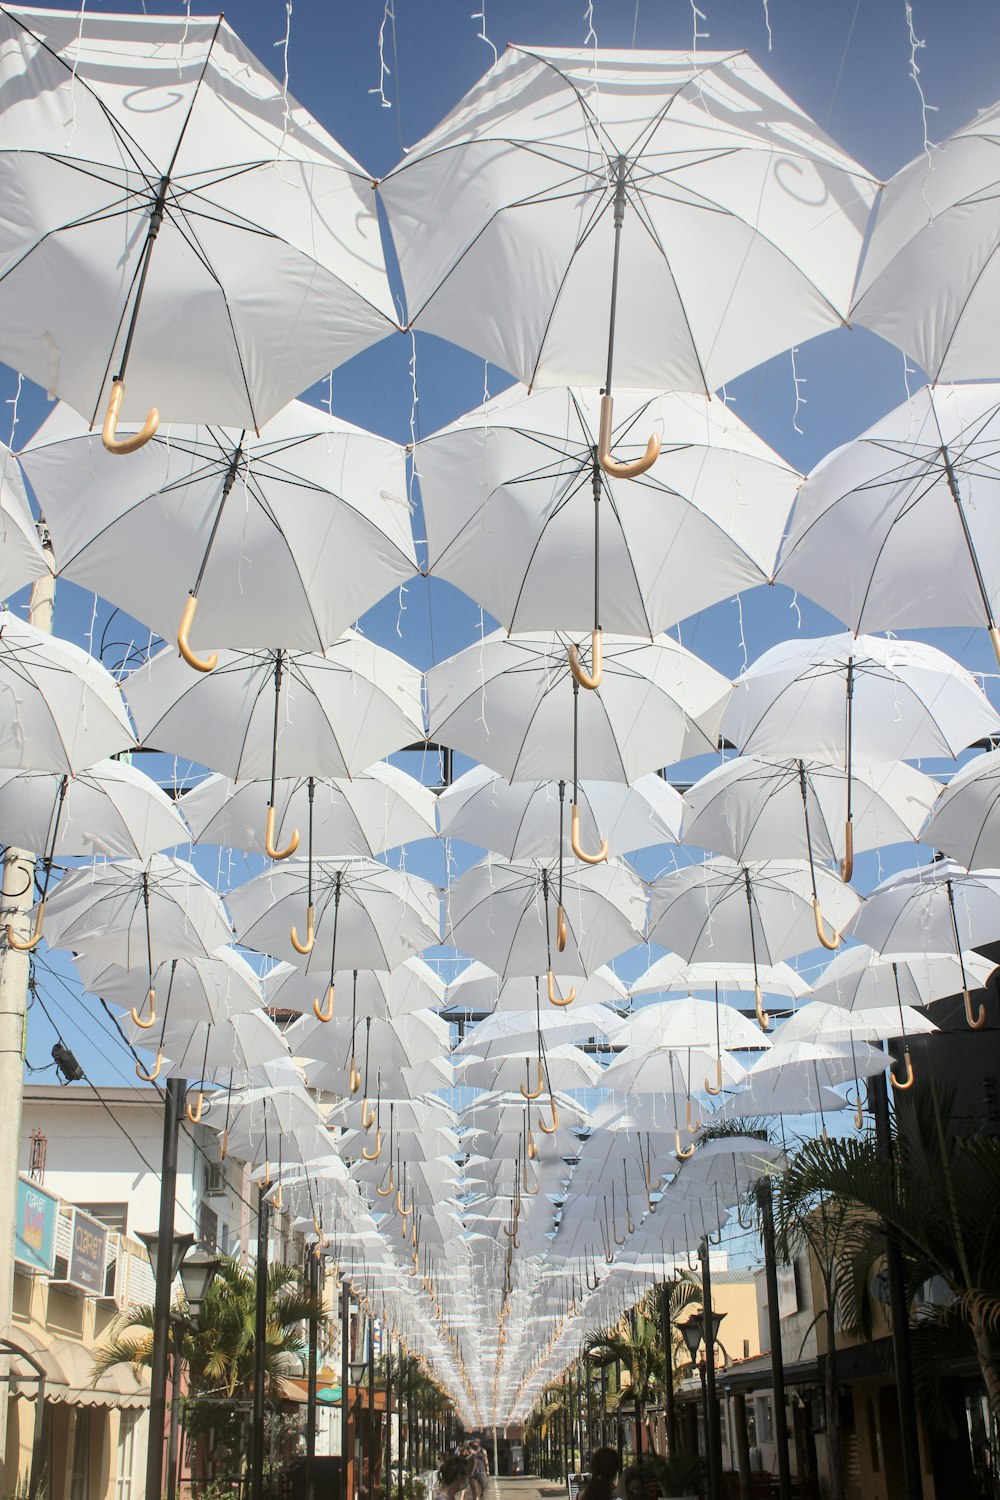 a group of white umbrellas hanging from the ceiling